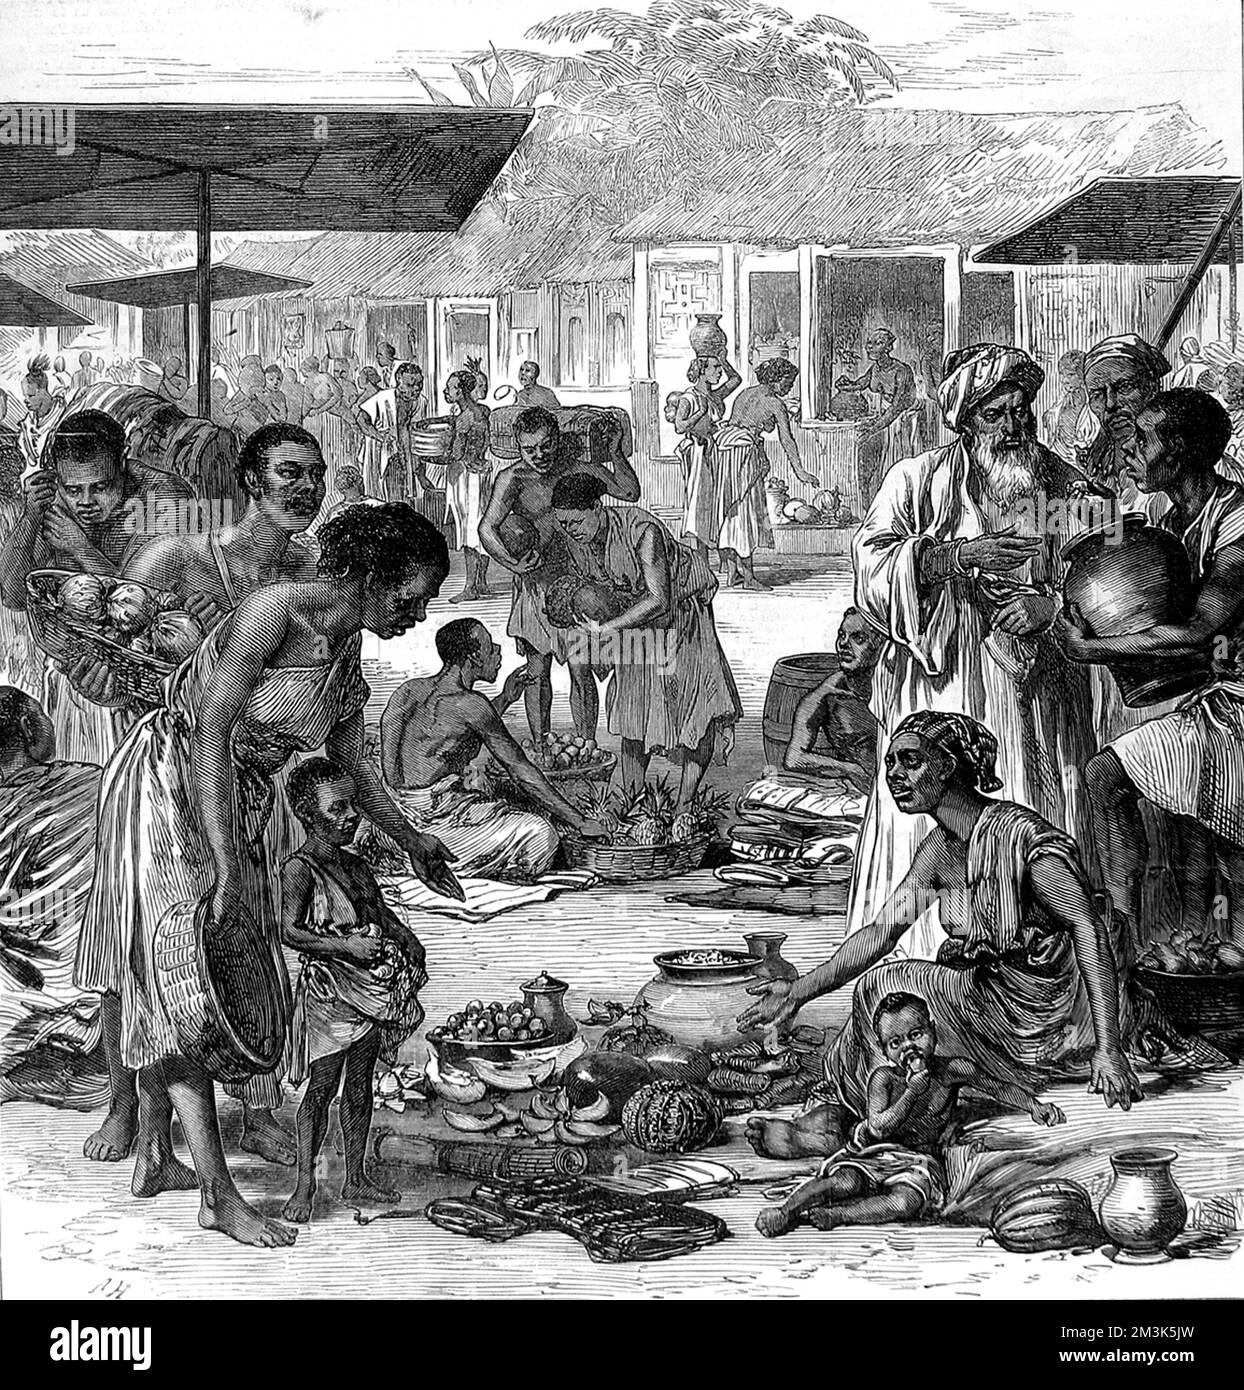 The market place at Kumasi before the arrival of the British forces during the 2nd Ashanti War. In 1873, after decades of an uneasy relationship between the British and the Acing people of central Ghana, the British attacked and virtually destroyed the Asanti capital of Kumasi, and officially declared Ghana a crown colony on 24 July 1874.  1873 Stock Photo